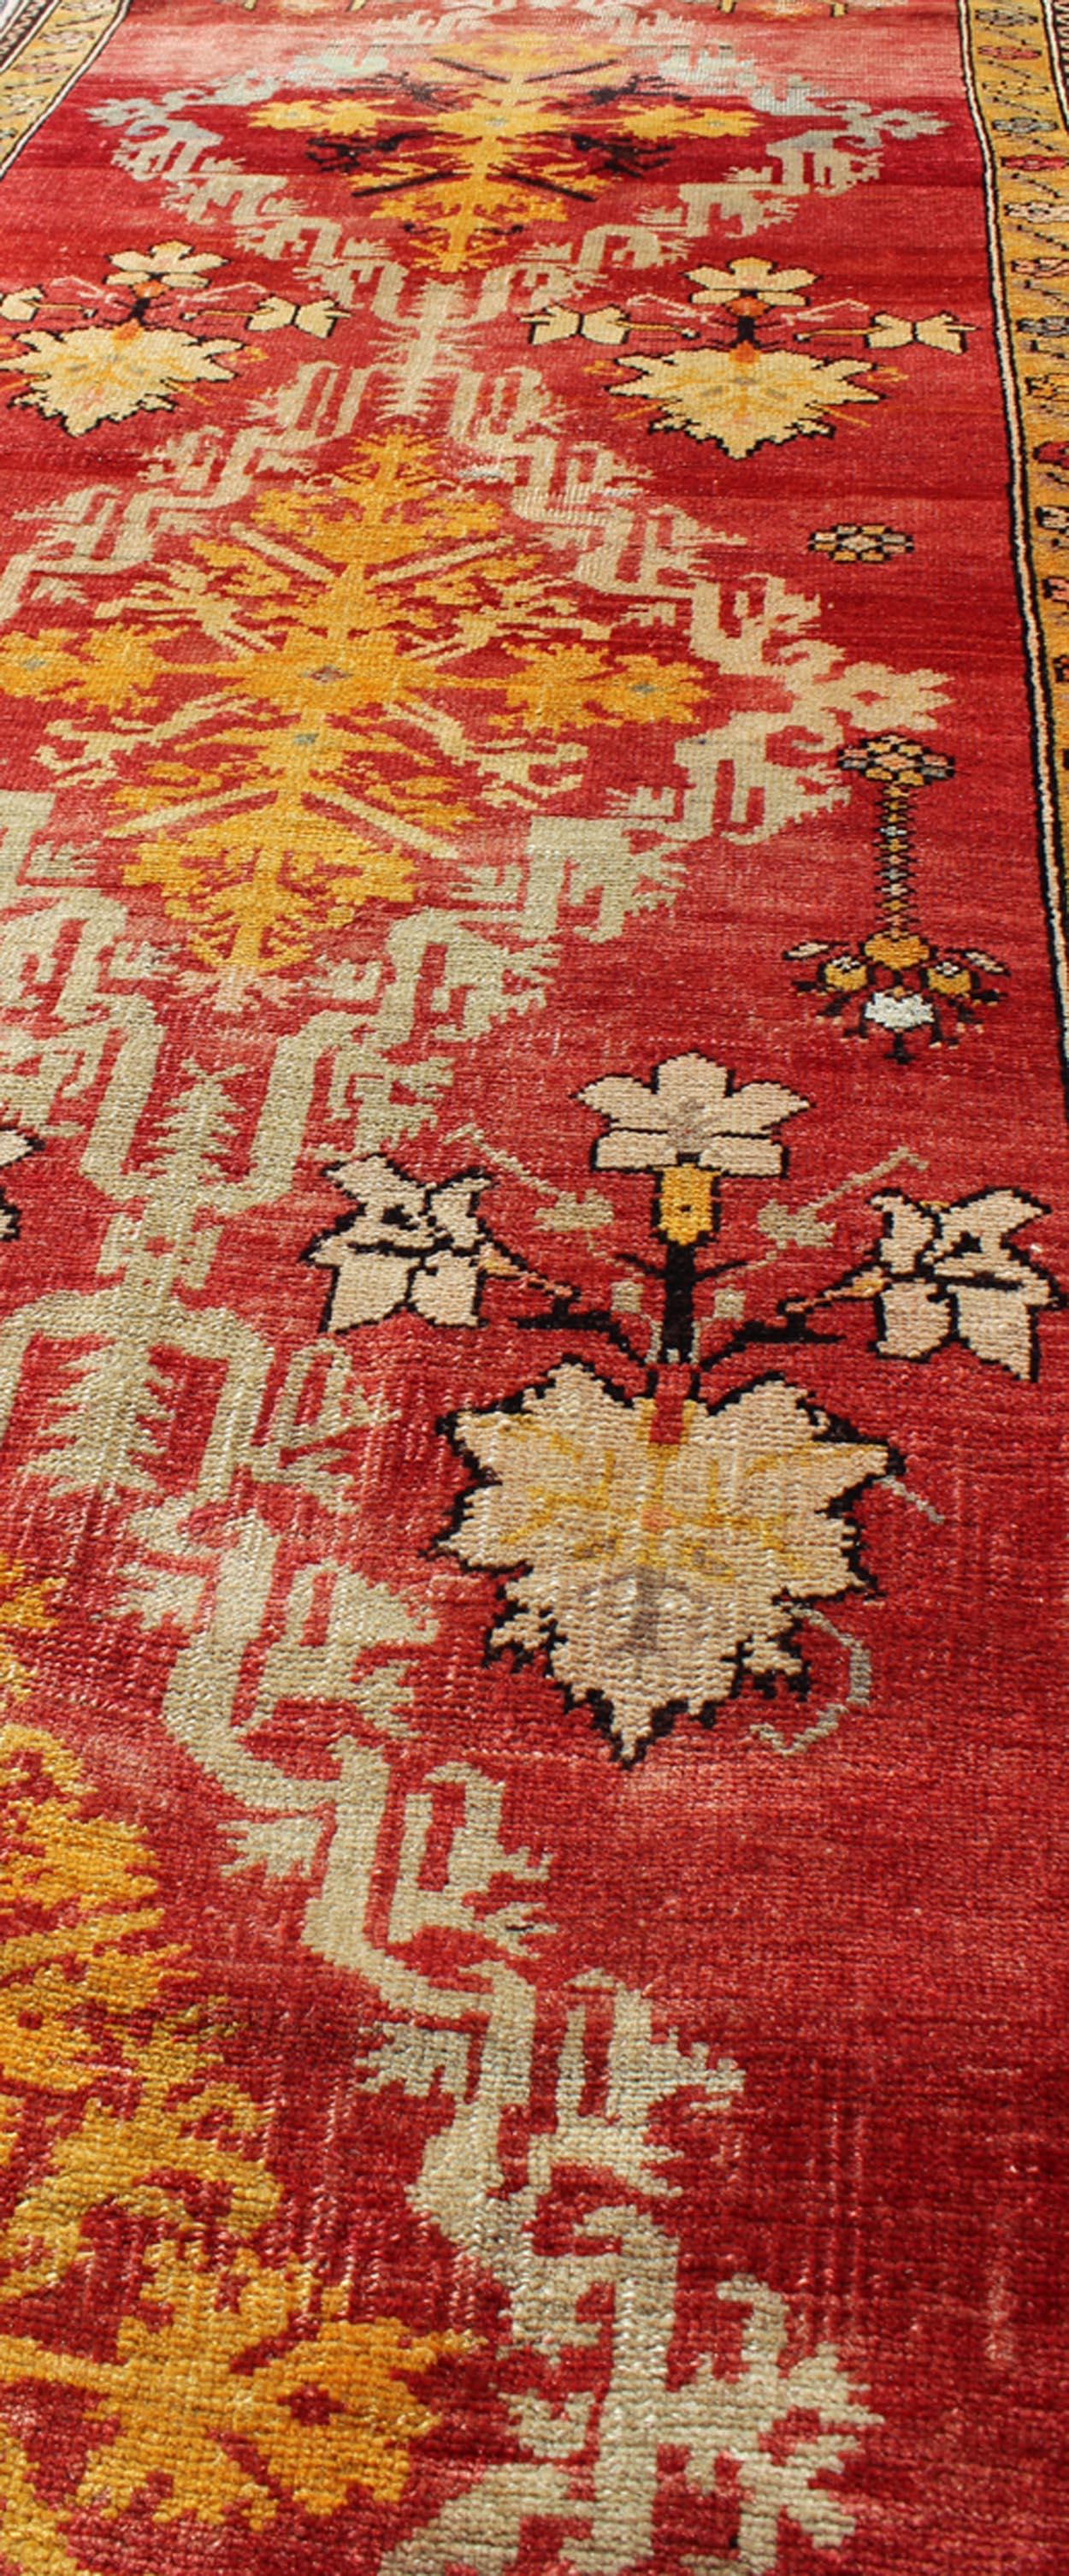 Antique Turkish Oushak Runner with Tribal Medallions in Red, Orange, and Yellow For Sale 2